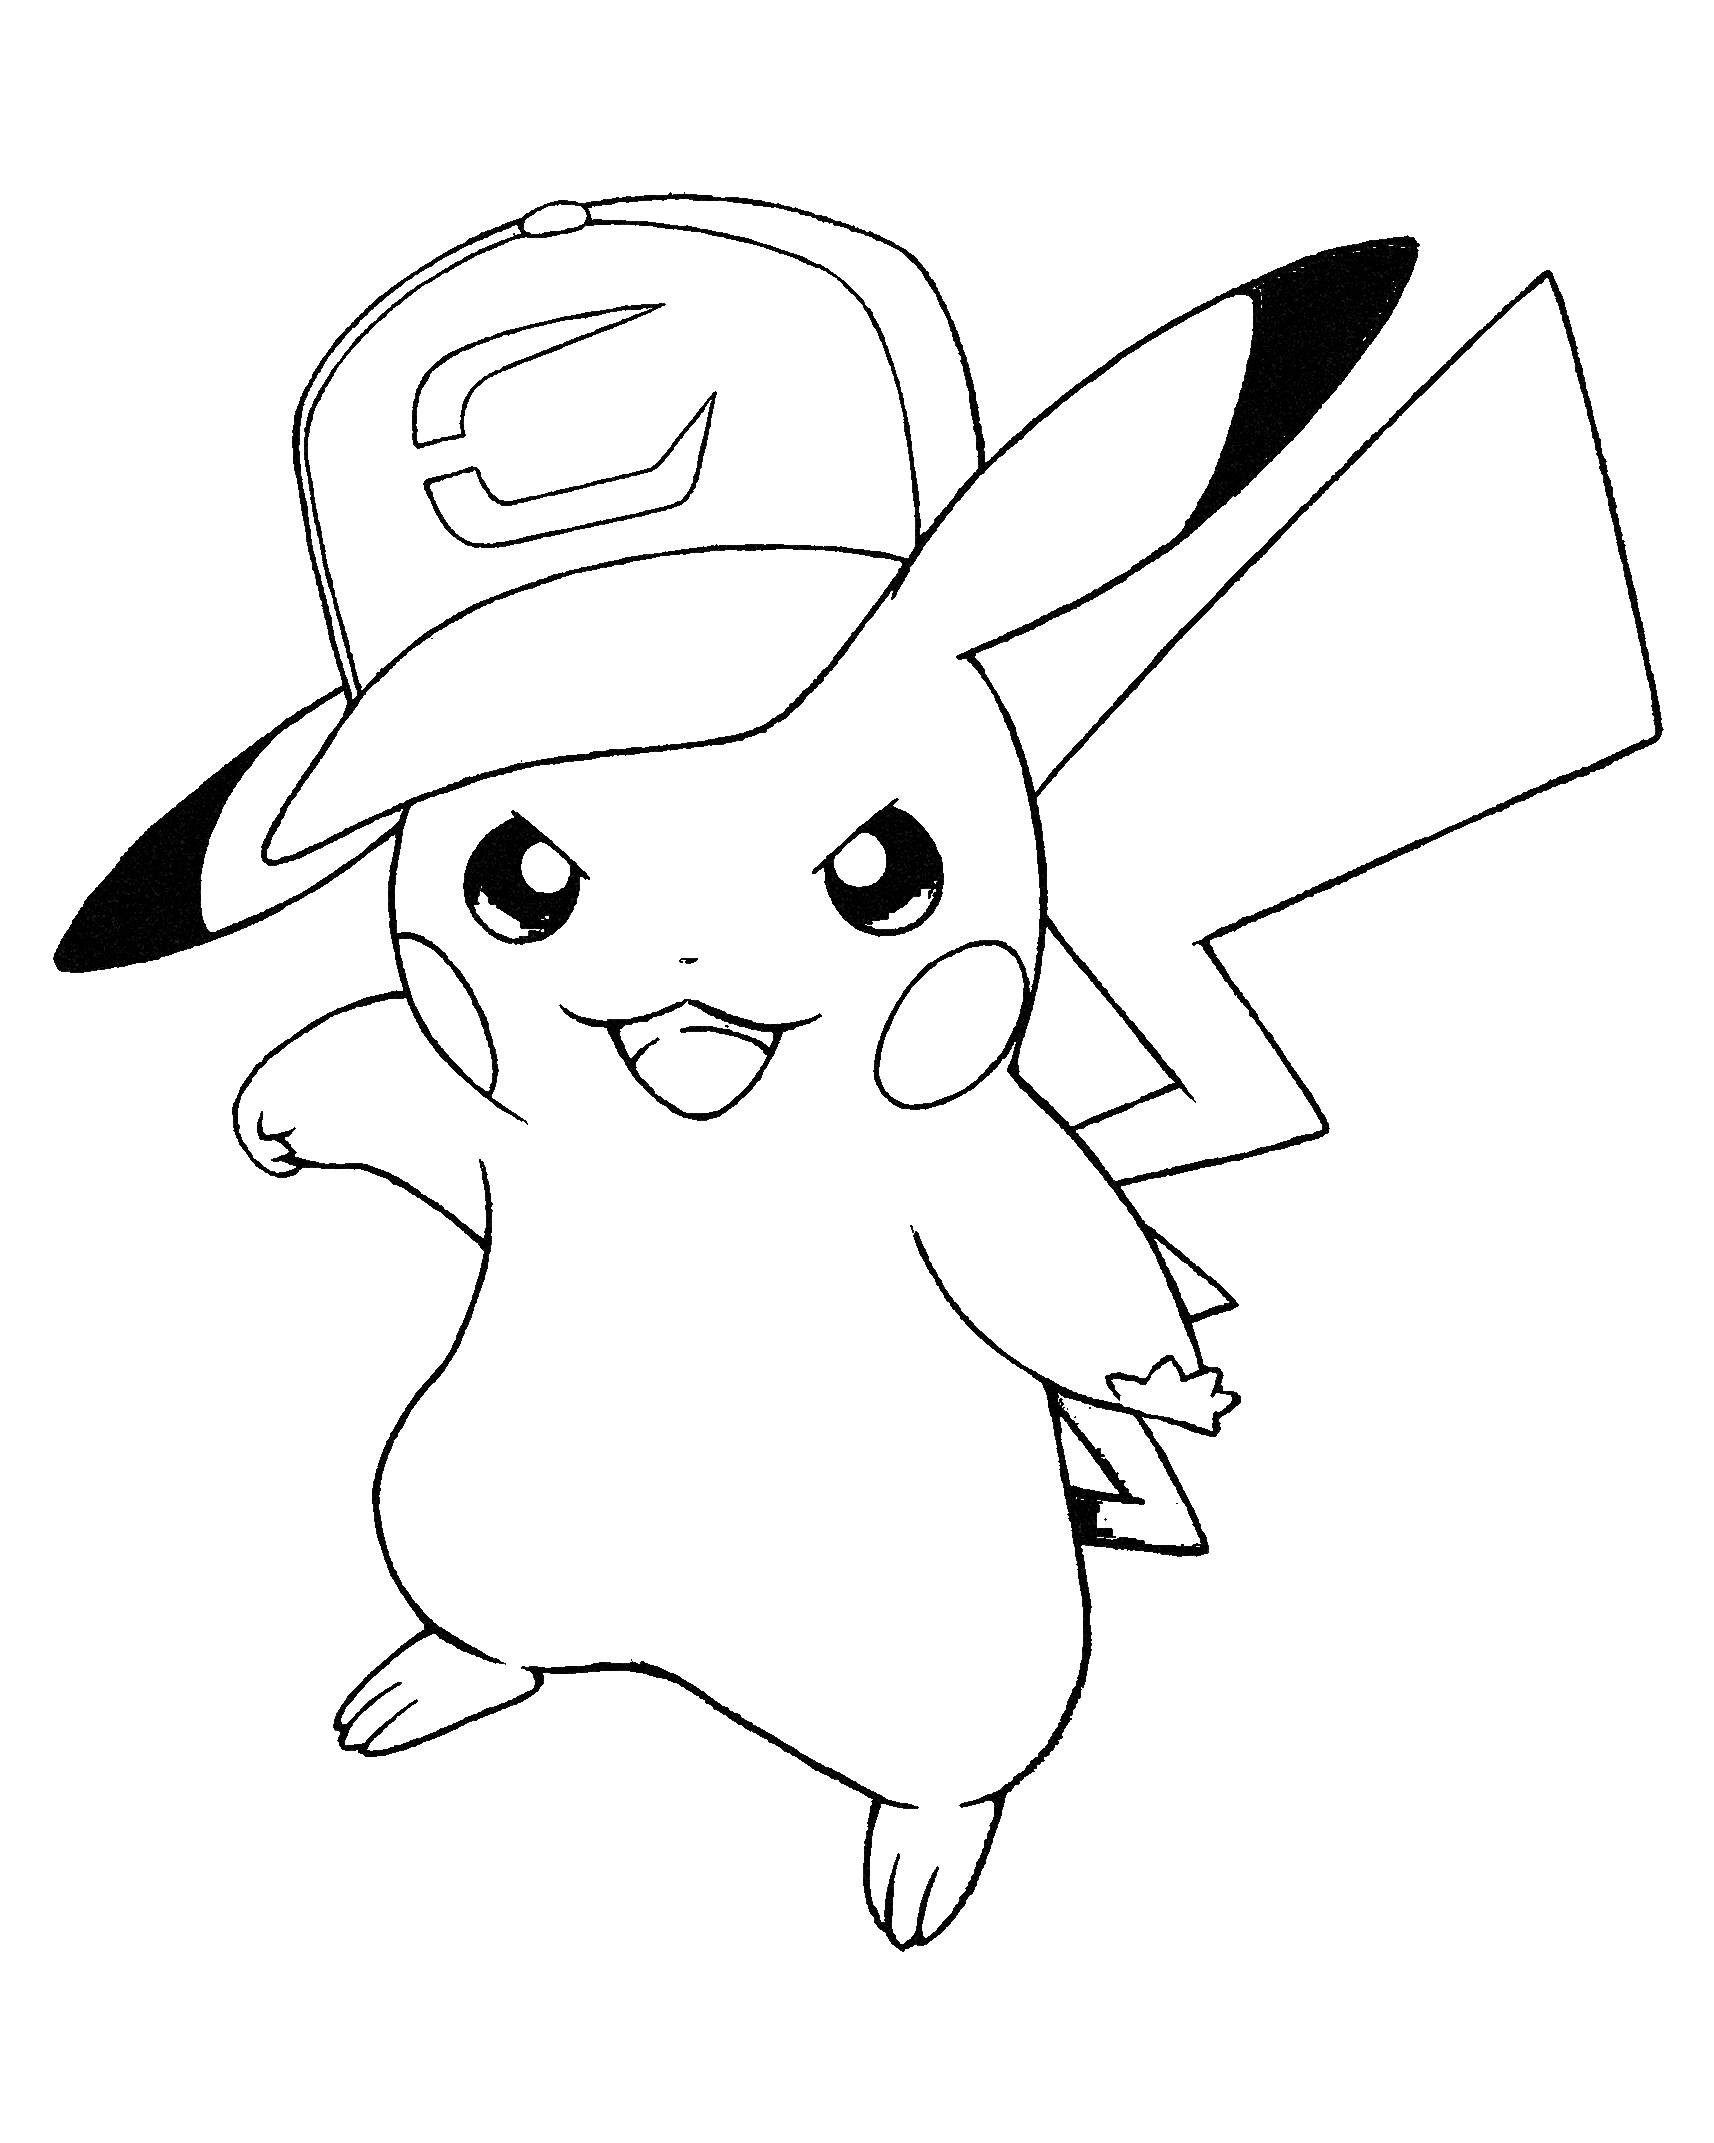 Pickachu Coloring Pages - Coloring Home